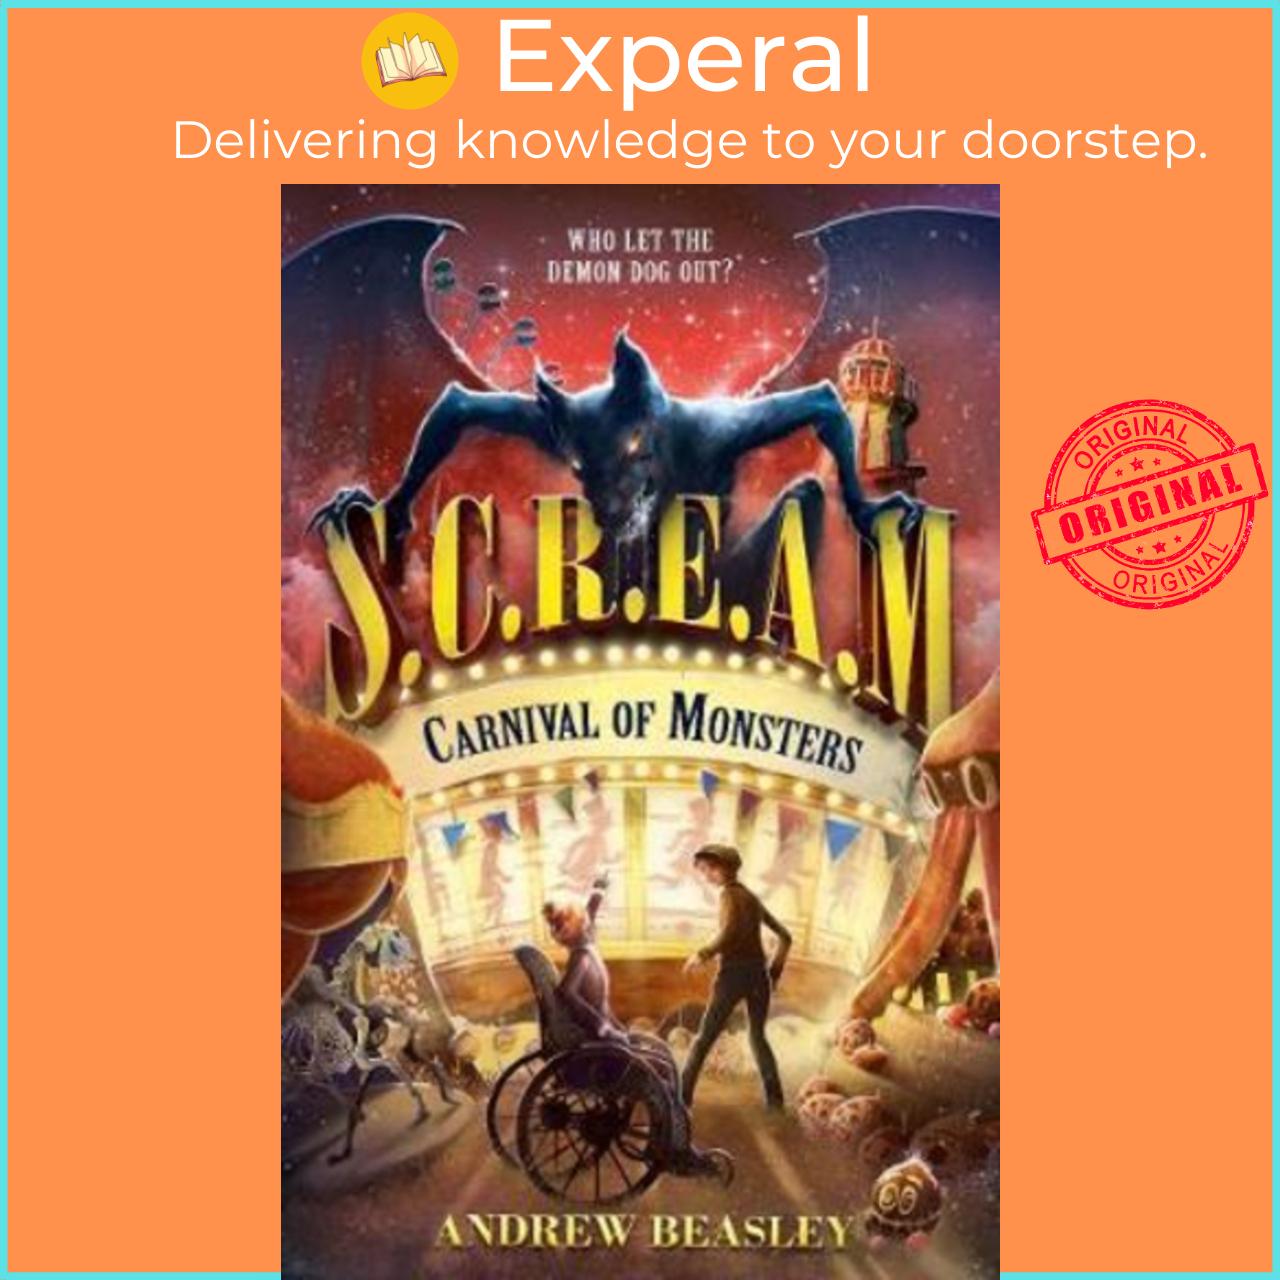 Sách - Carnival Of Monsters by Andrew Beasley (UK edition, paperback)